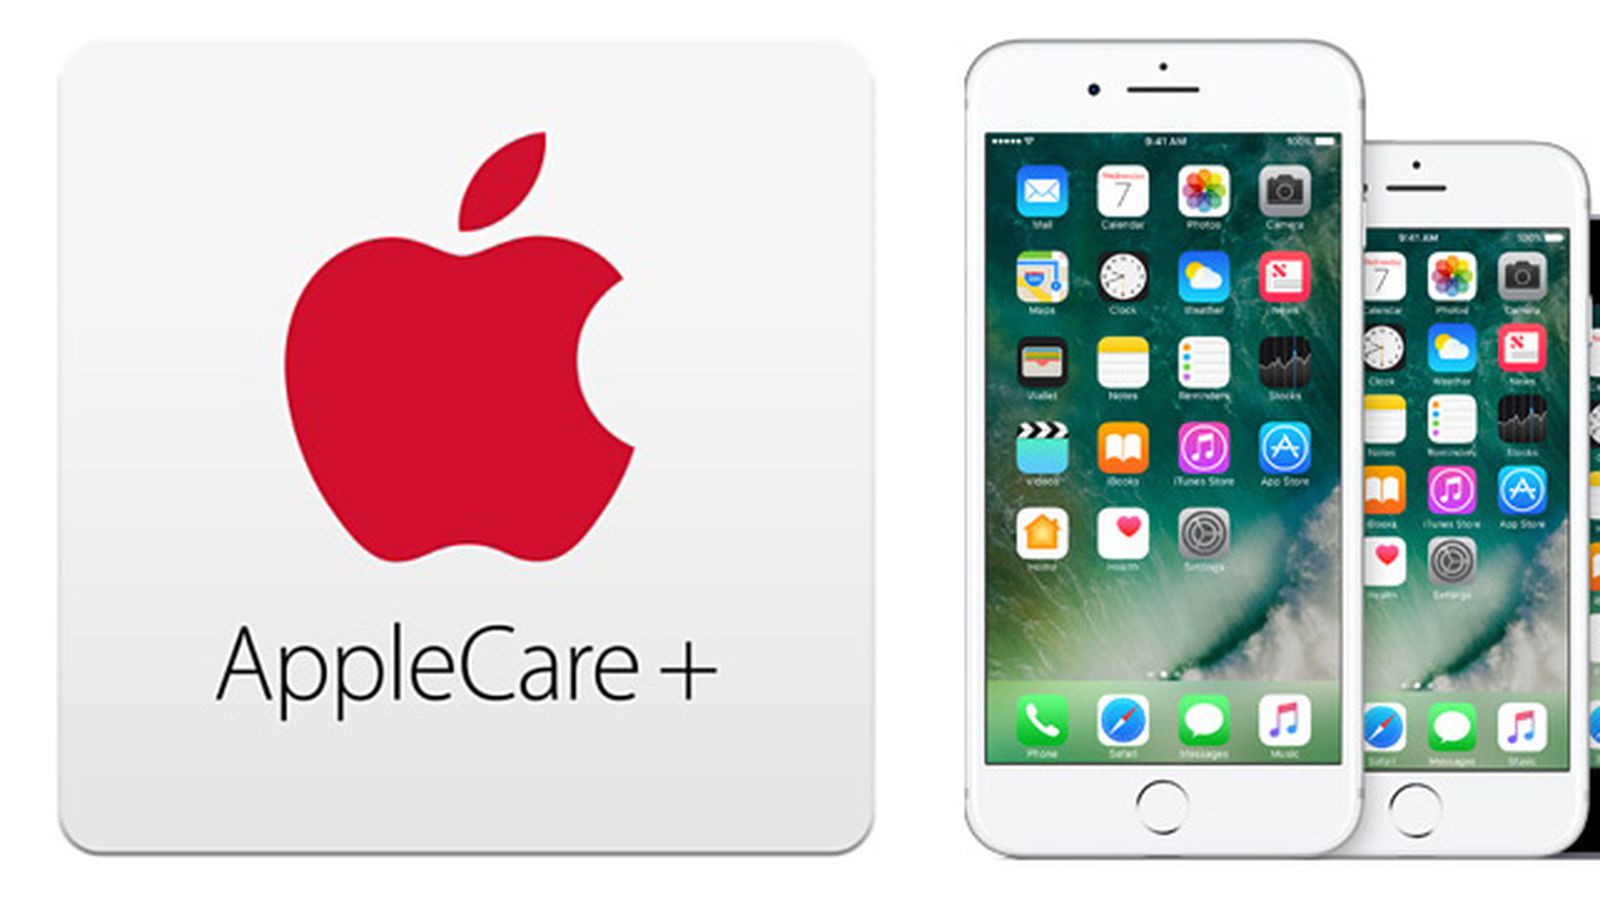 how long do you have to purchase applecare